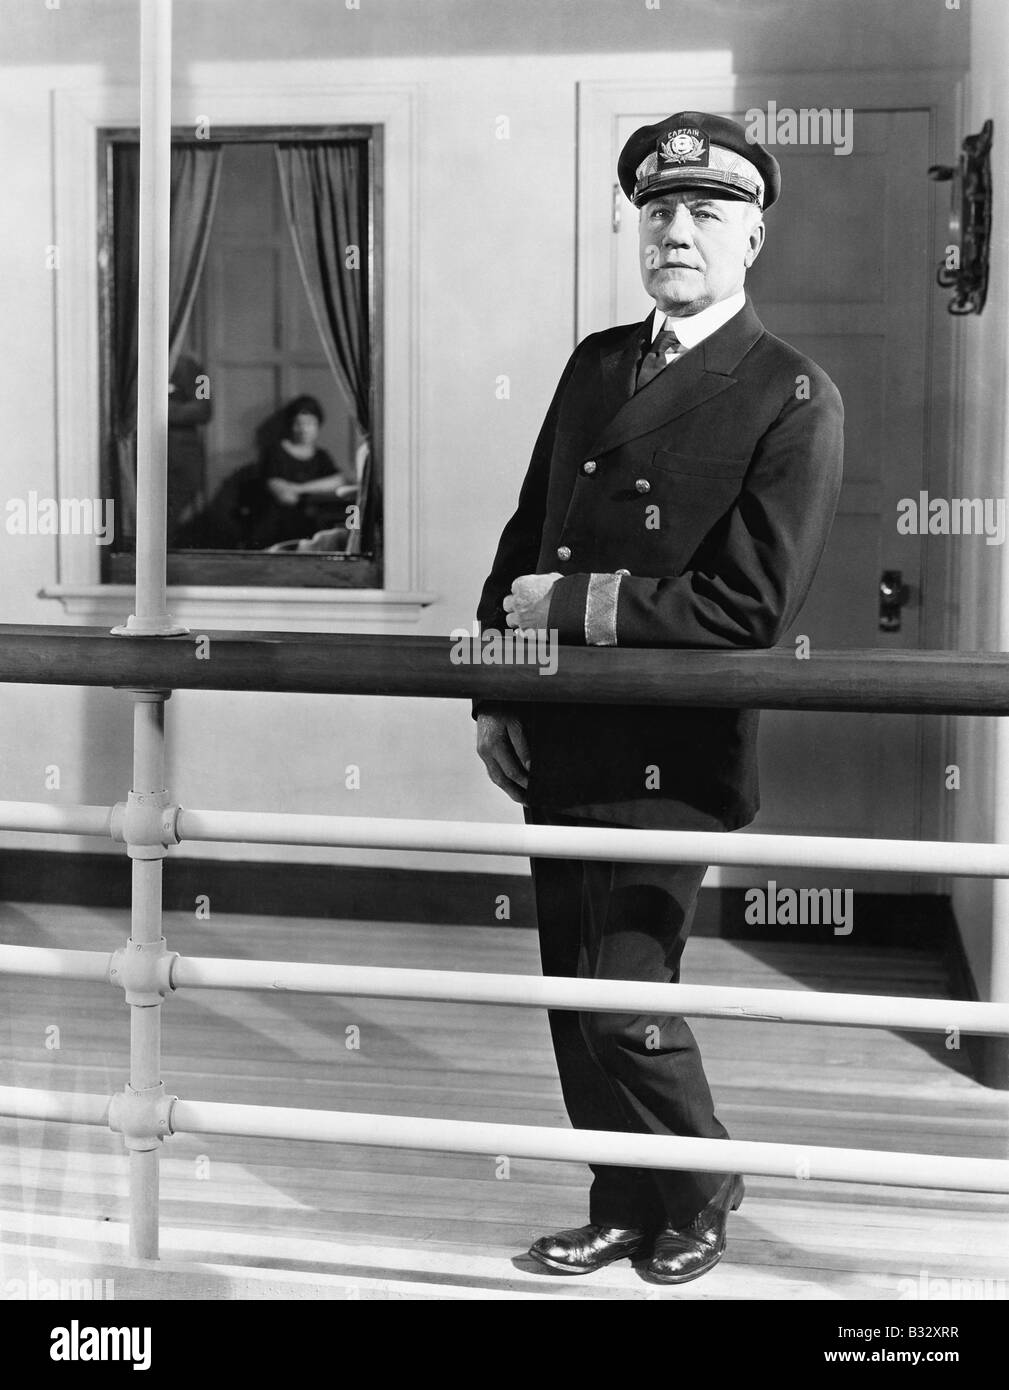 Ship captain Black and White Stock Photos & Images - Alamy